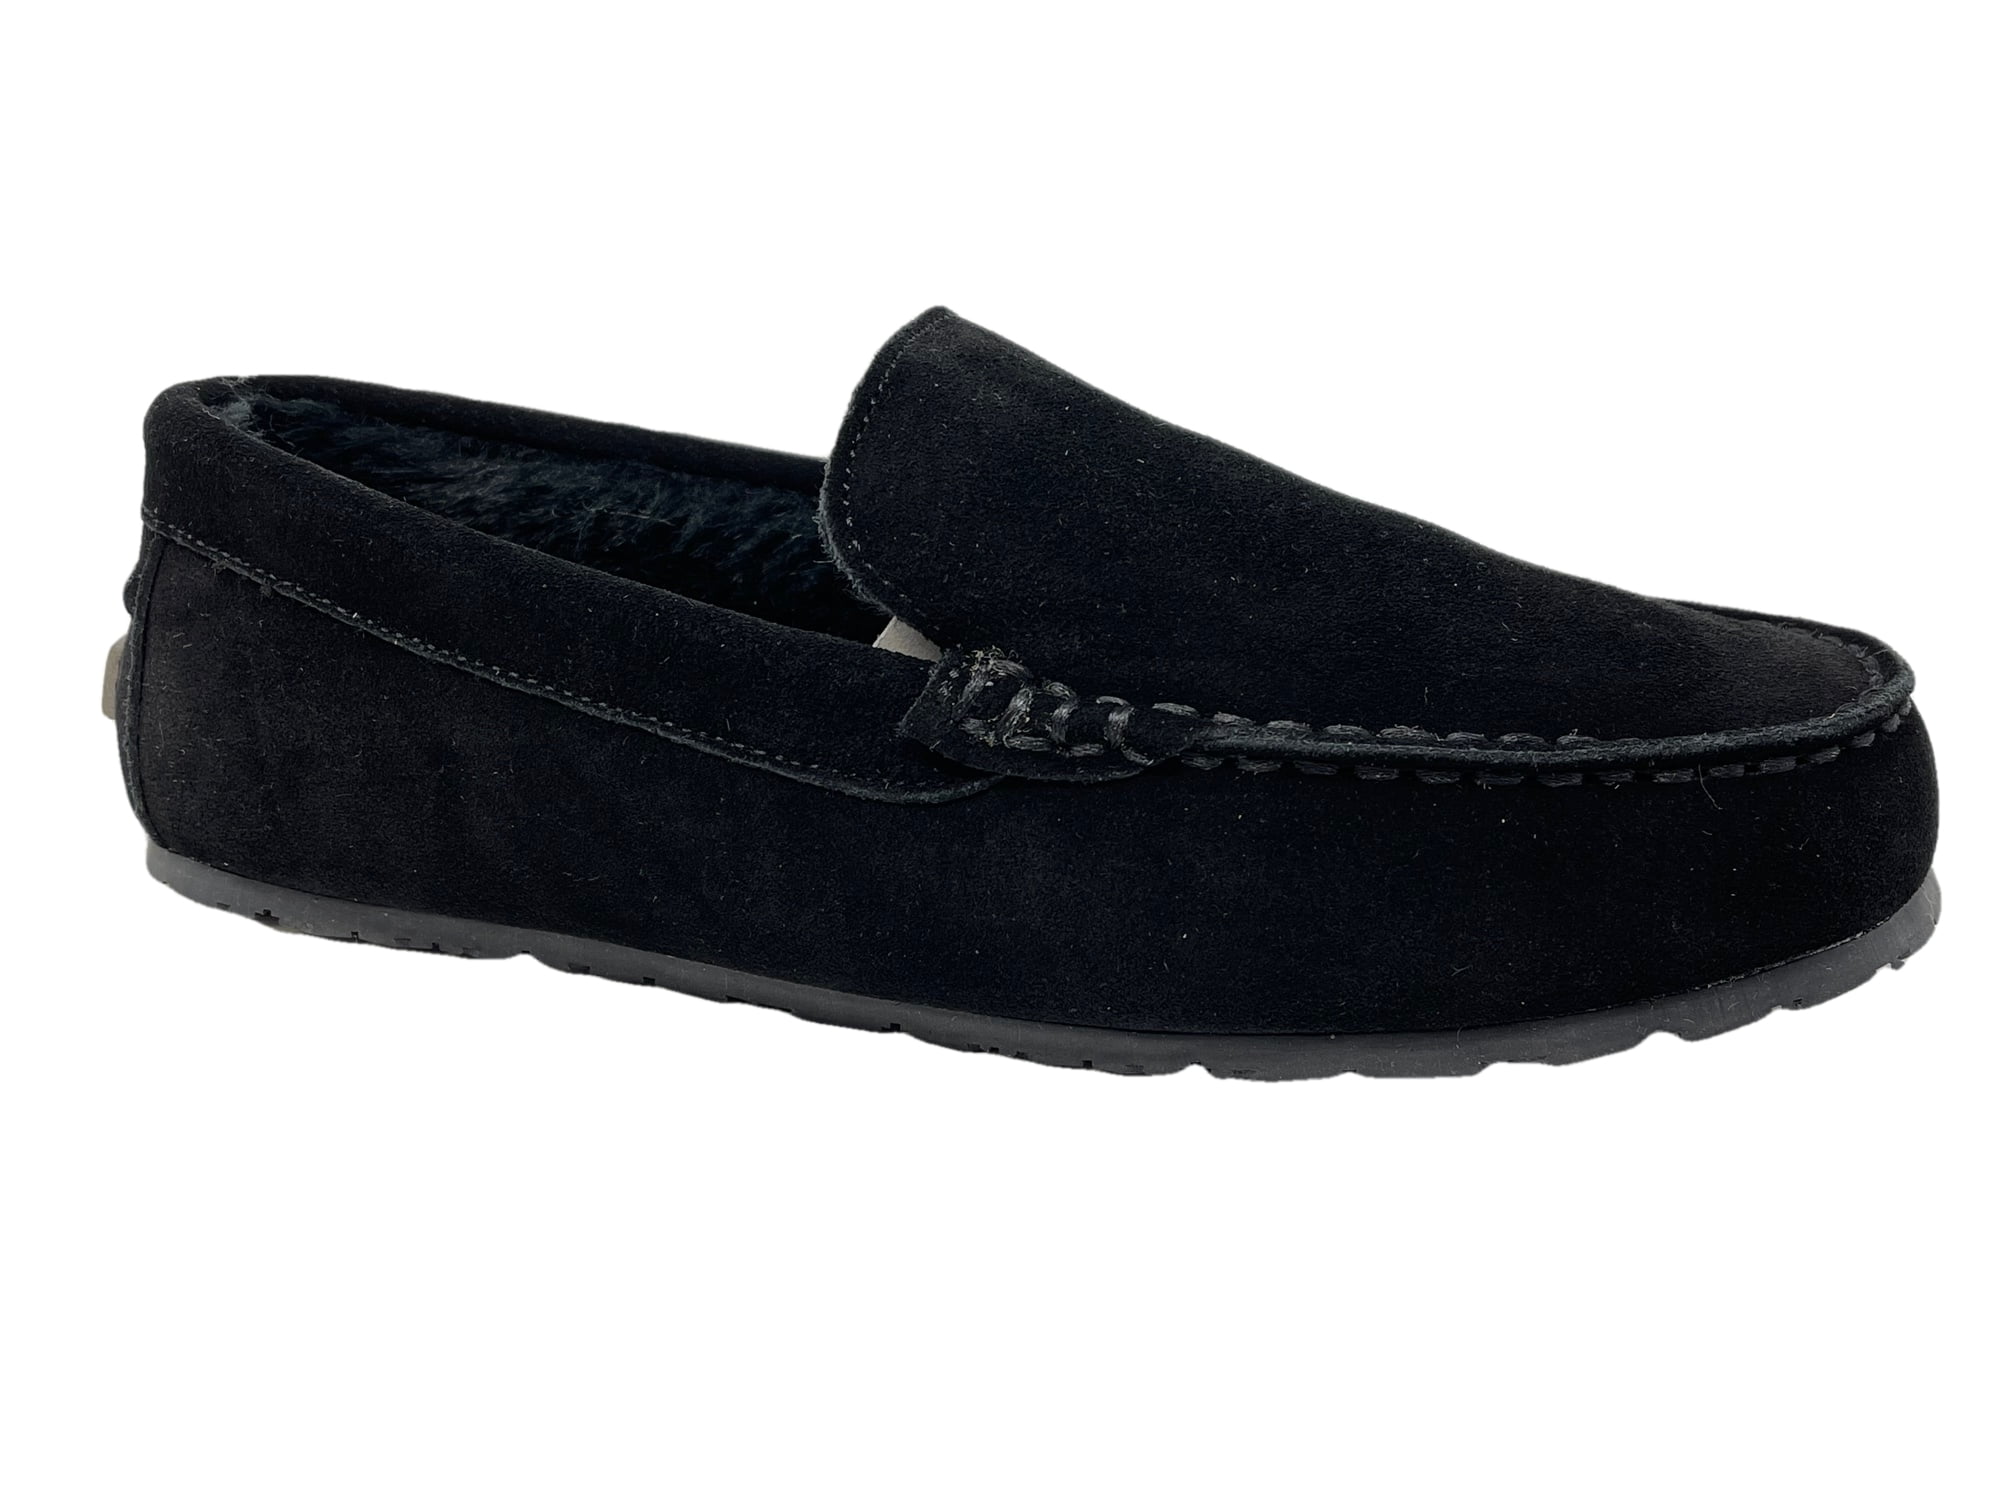 Clarks Mens Suede Moccasin Slippers Warm Cozy Indoor Outdoor Plush Faux ...